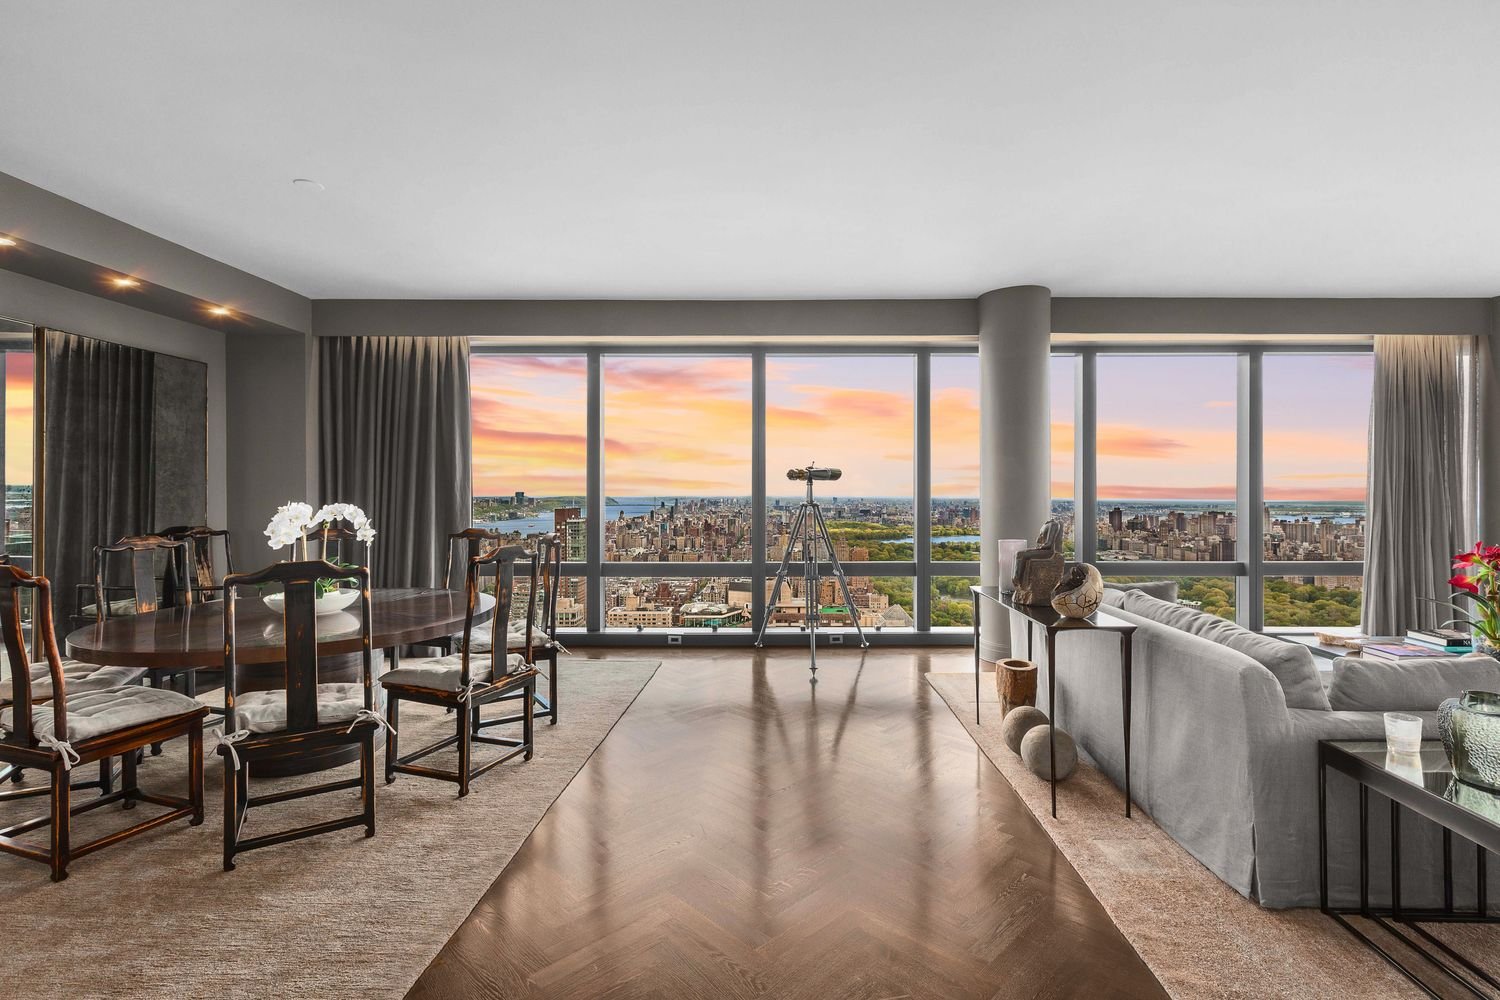 Upper West Side, NY - $16,000,000